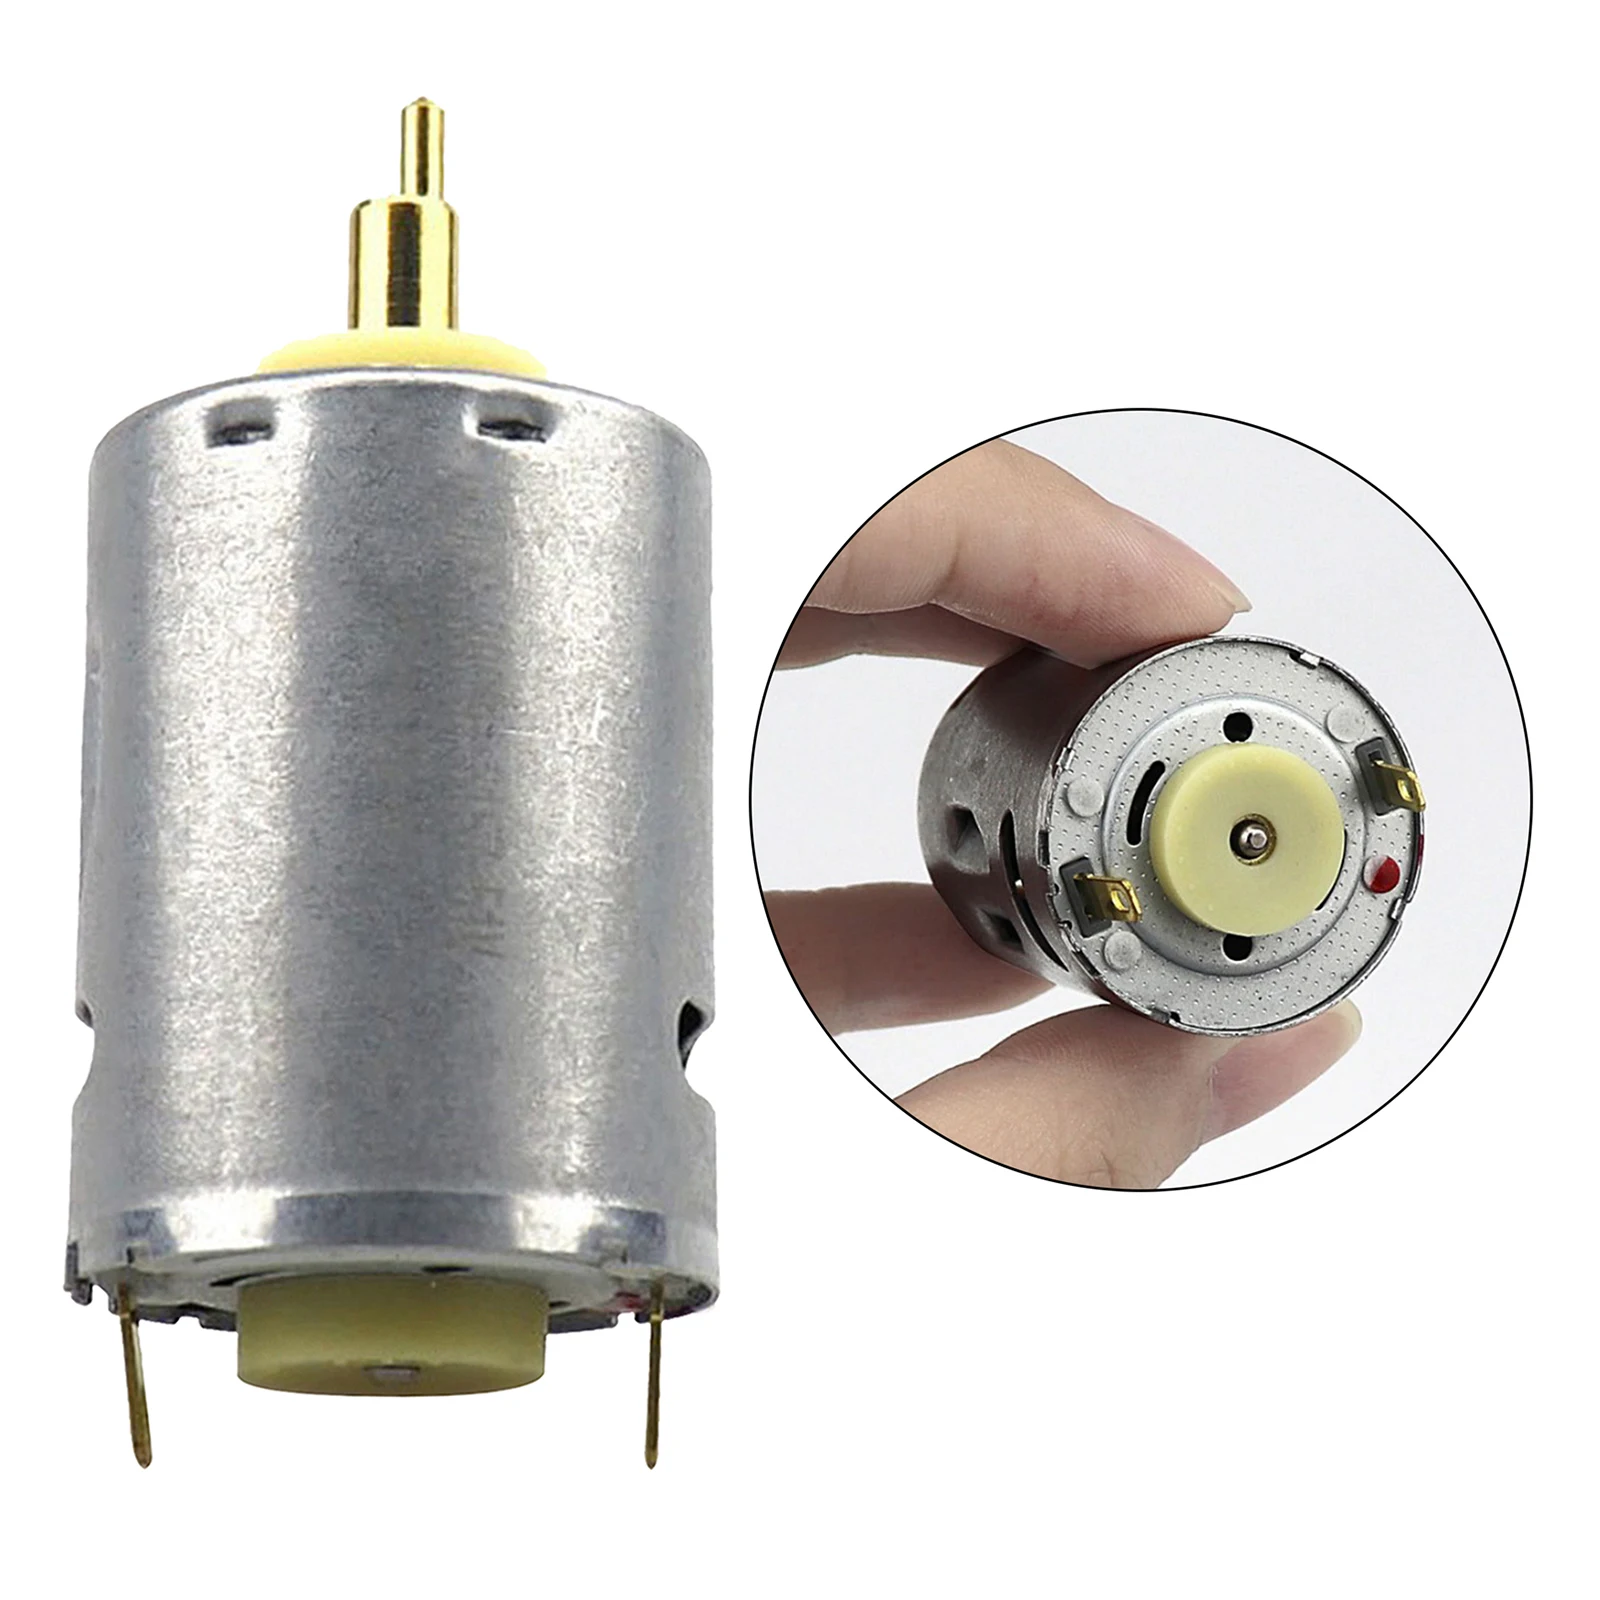 Electric Rotary Motor 6500 RPM DC 3.6V Replacement Replaces fits for Wahl 8148 8591 Hair Clippers Parts Accessories